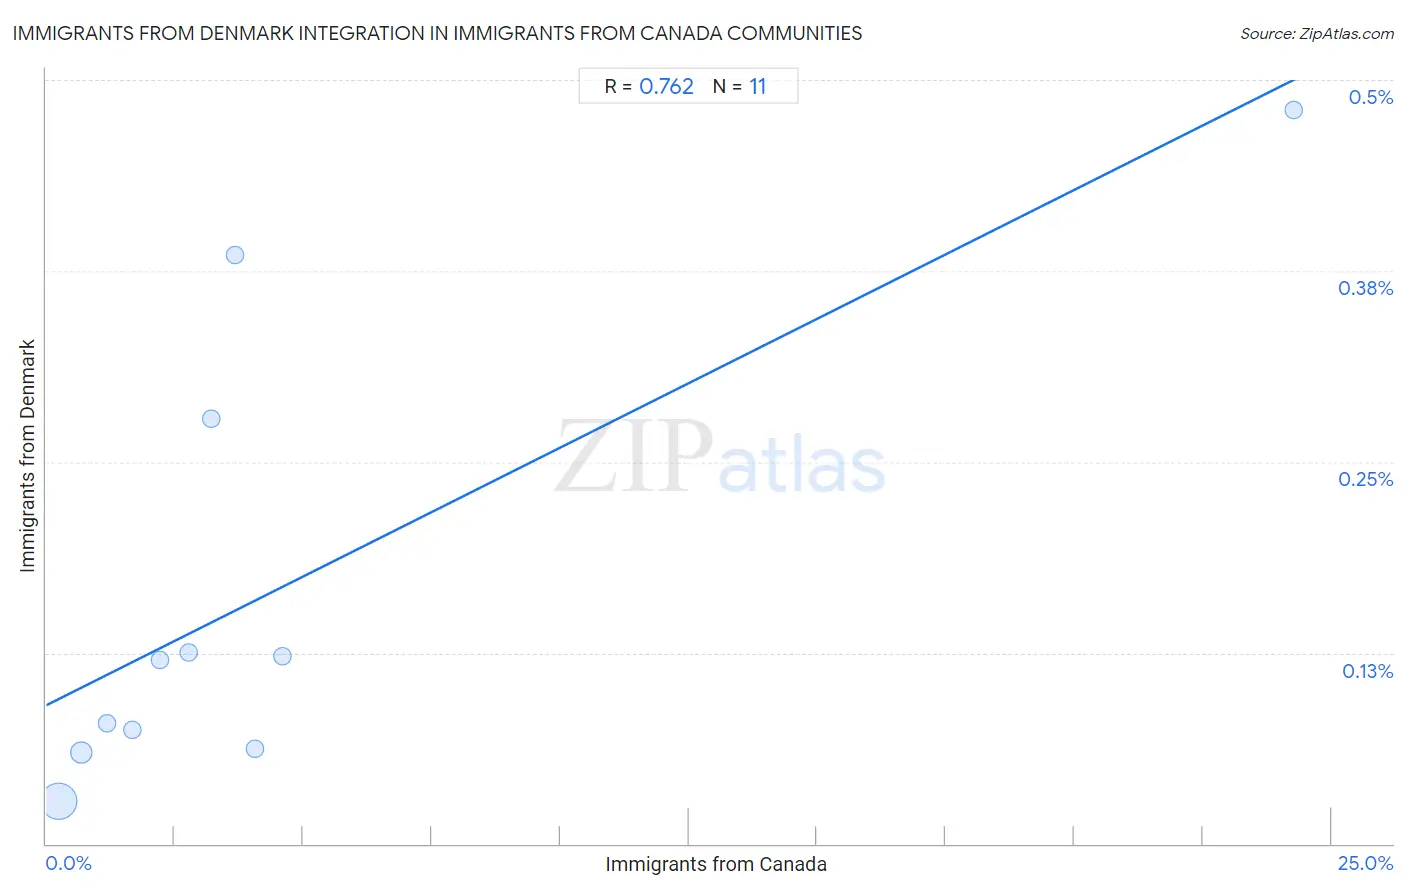 Immigrants from Canada Integration in Immigrants from Denmark Communities